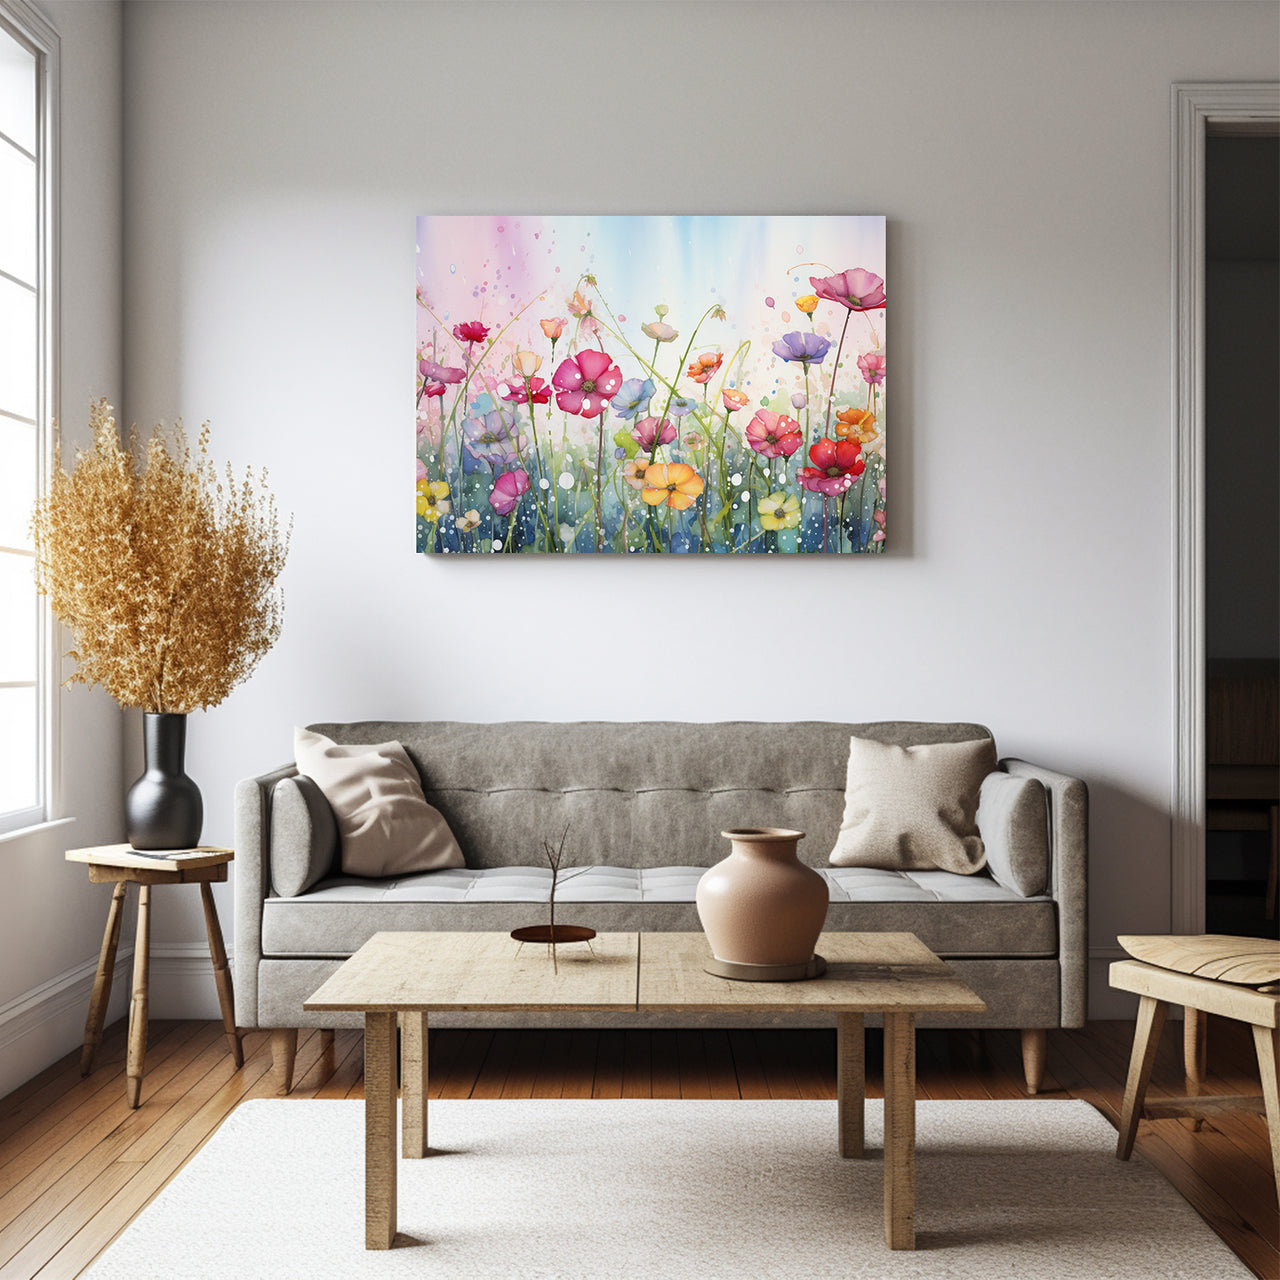 Wildflowers on Canvas, Flowers in Rain 03, Minimalist Flower Wall Art, Abstract Wall Art, Watercolor flowers, Floral Print, Classic, Rustic Farmhouse, Wildflower Home Decor, Flower Painting Canvas, Floral Wall Art